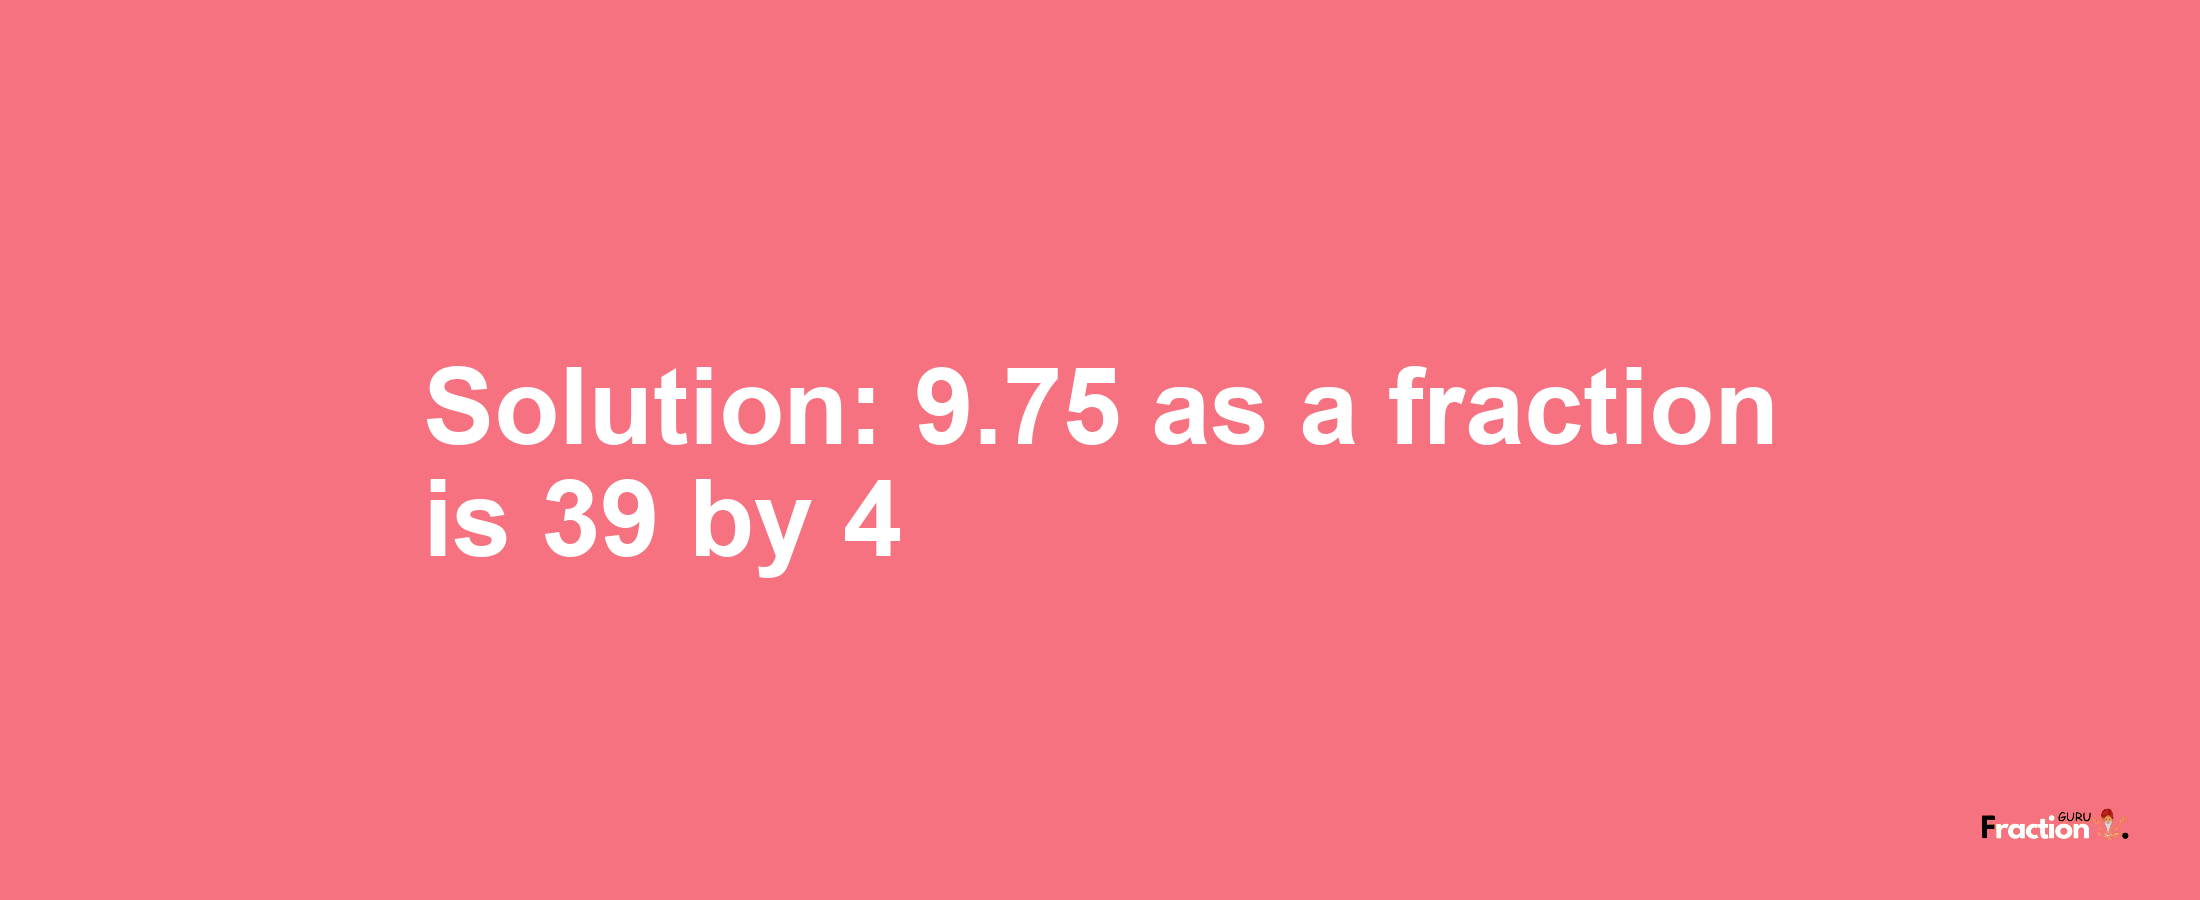 Solution:9.75 as a fraction is 39/4